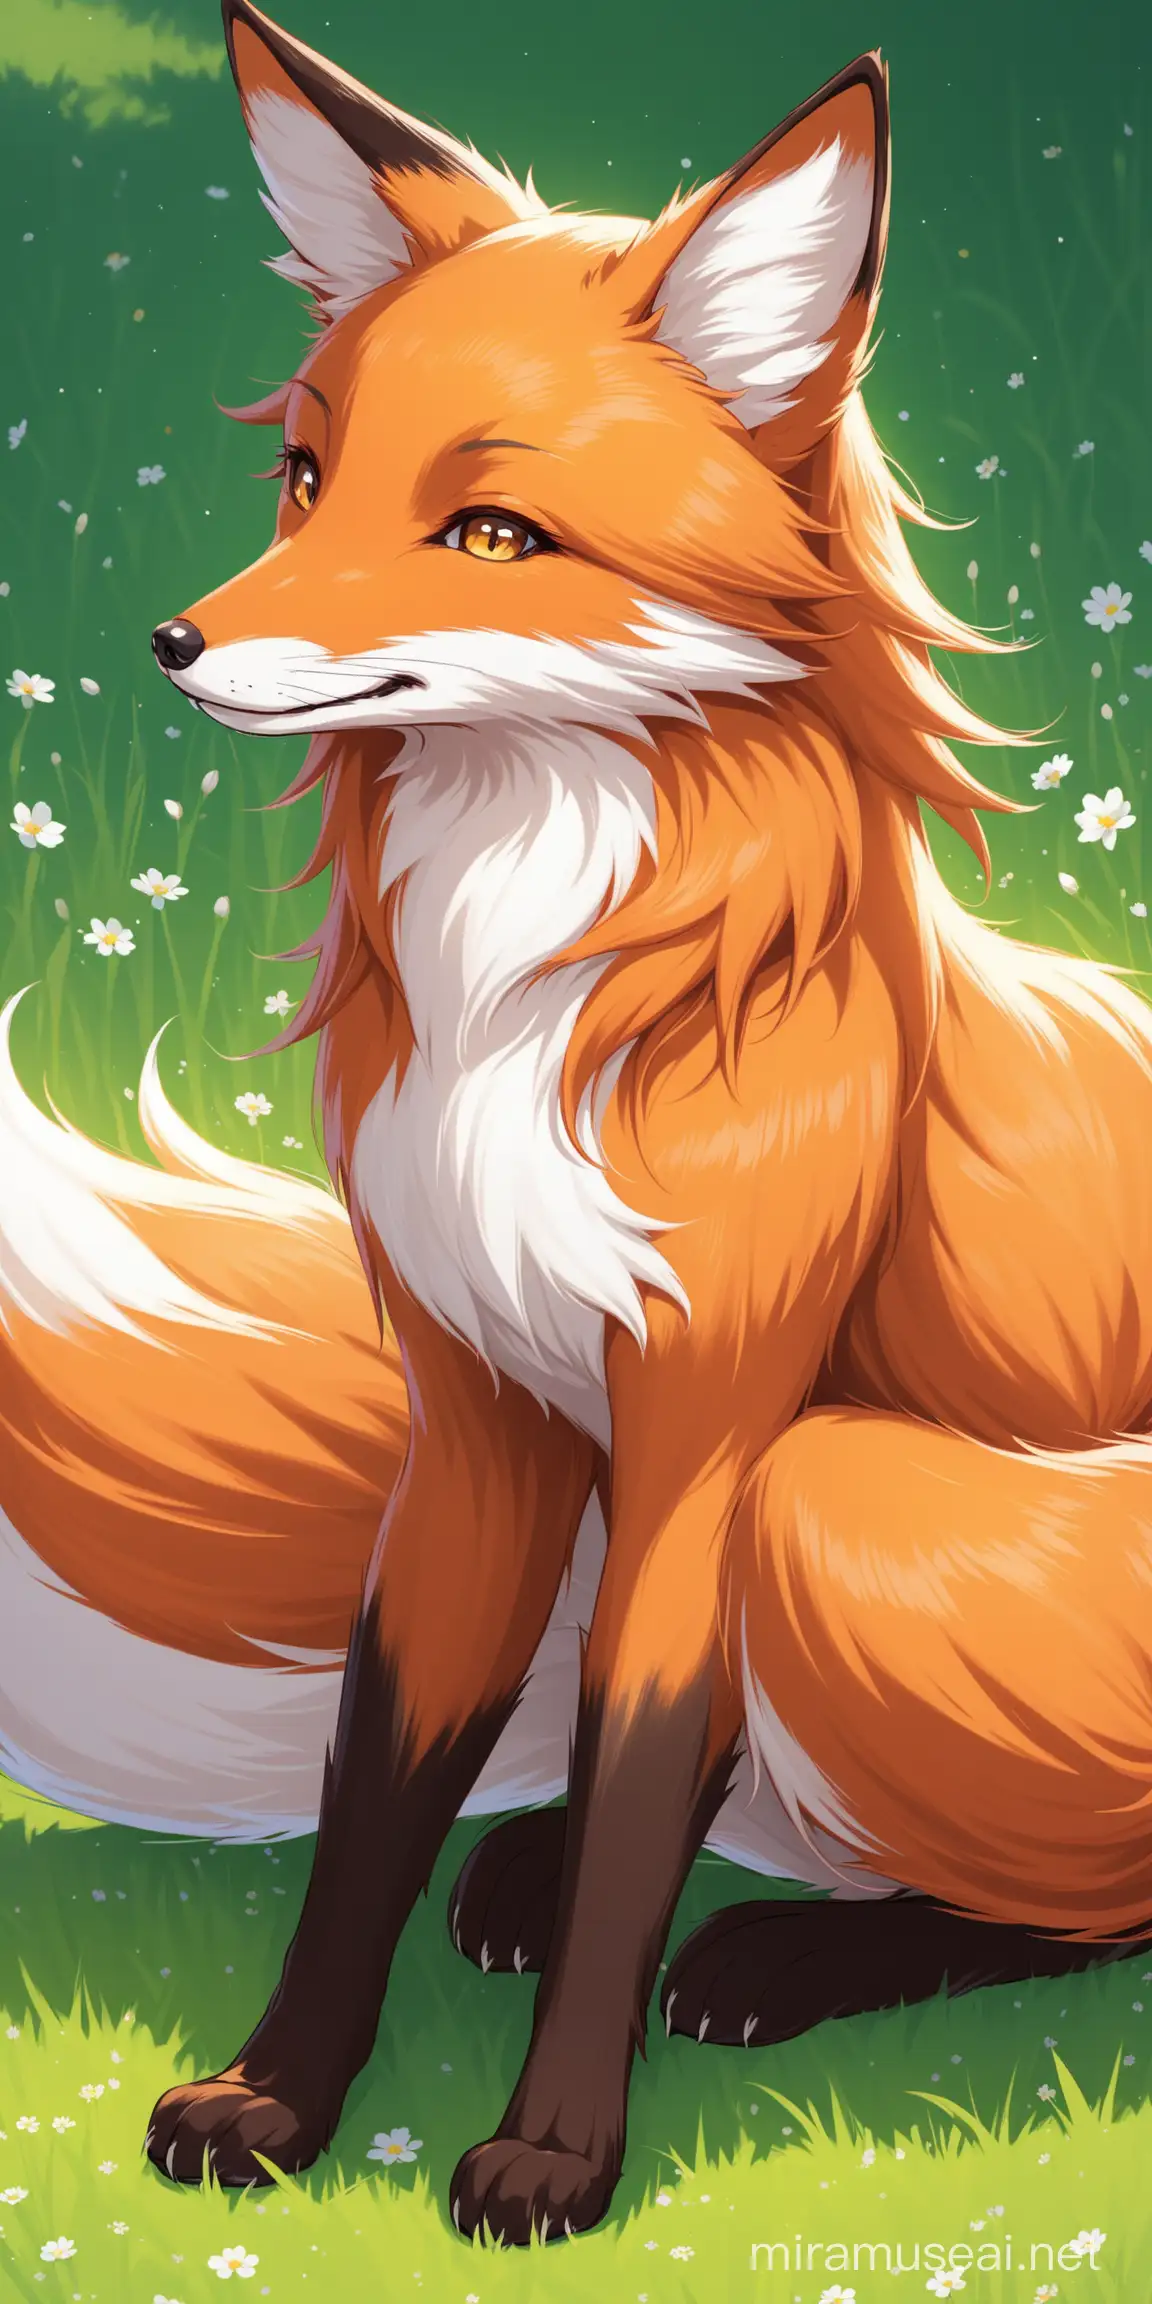 Graceful Female Fox in a Forest Setting